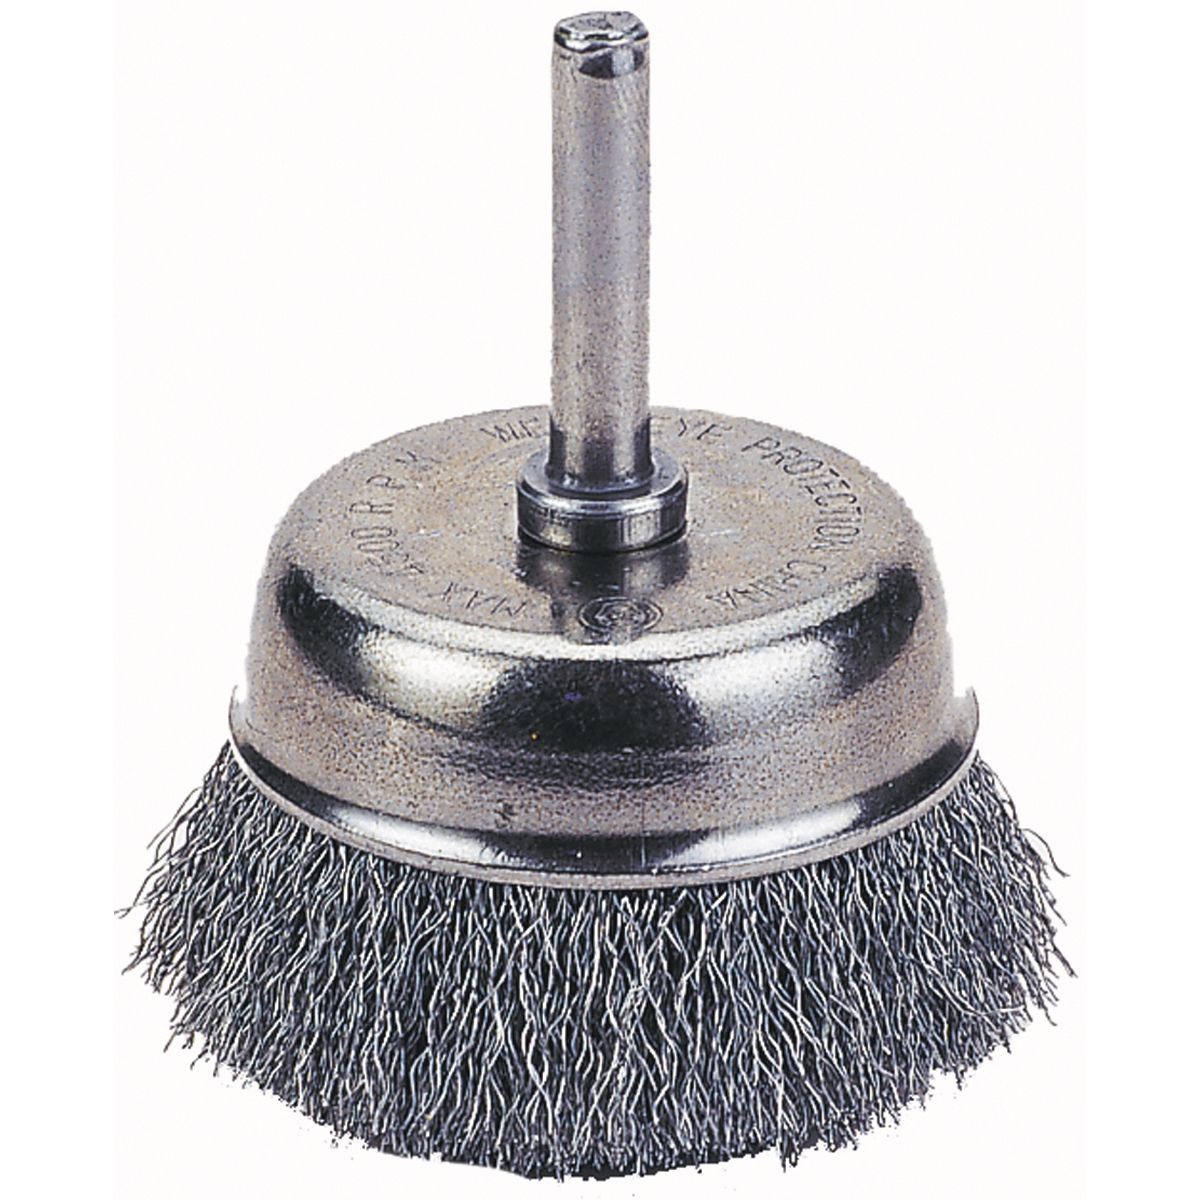 CUP BRUSH 1-1/2" CRIMPED WIRE